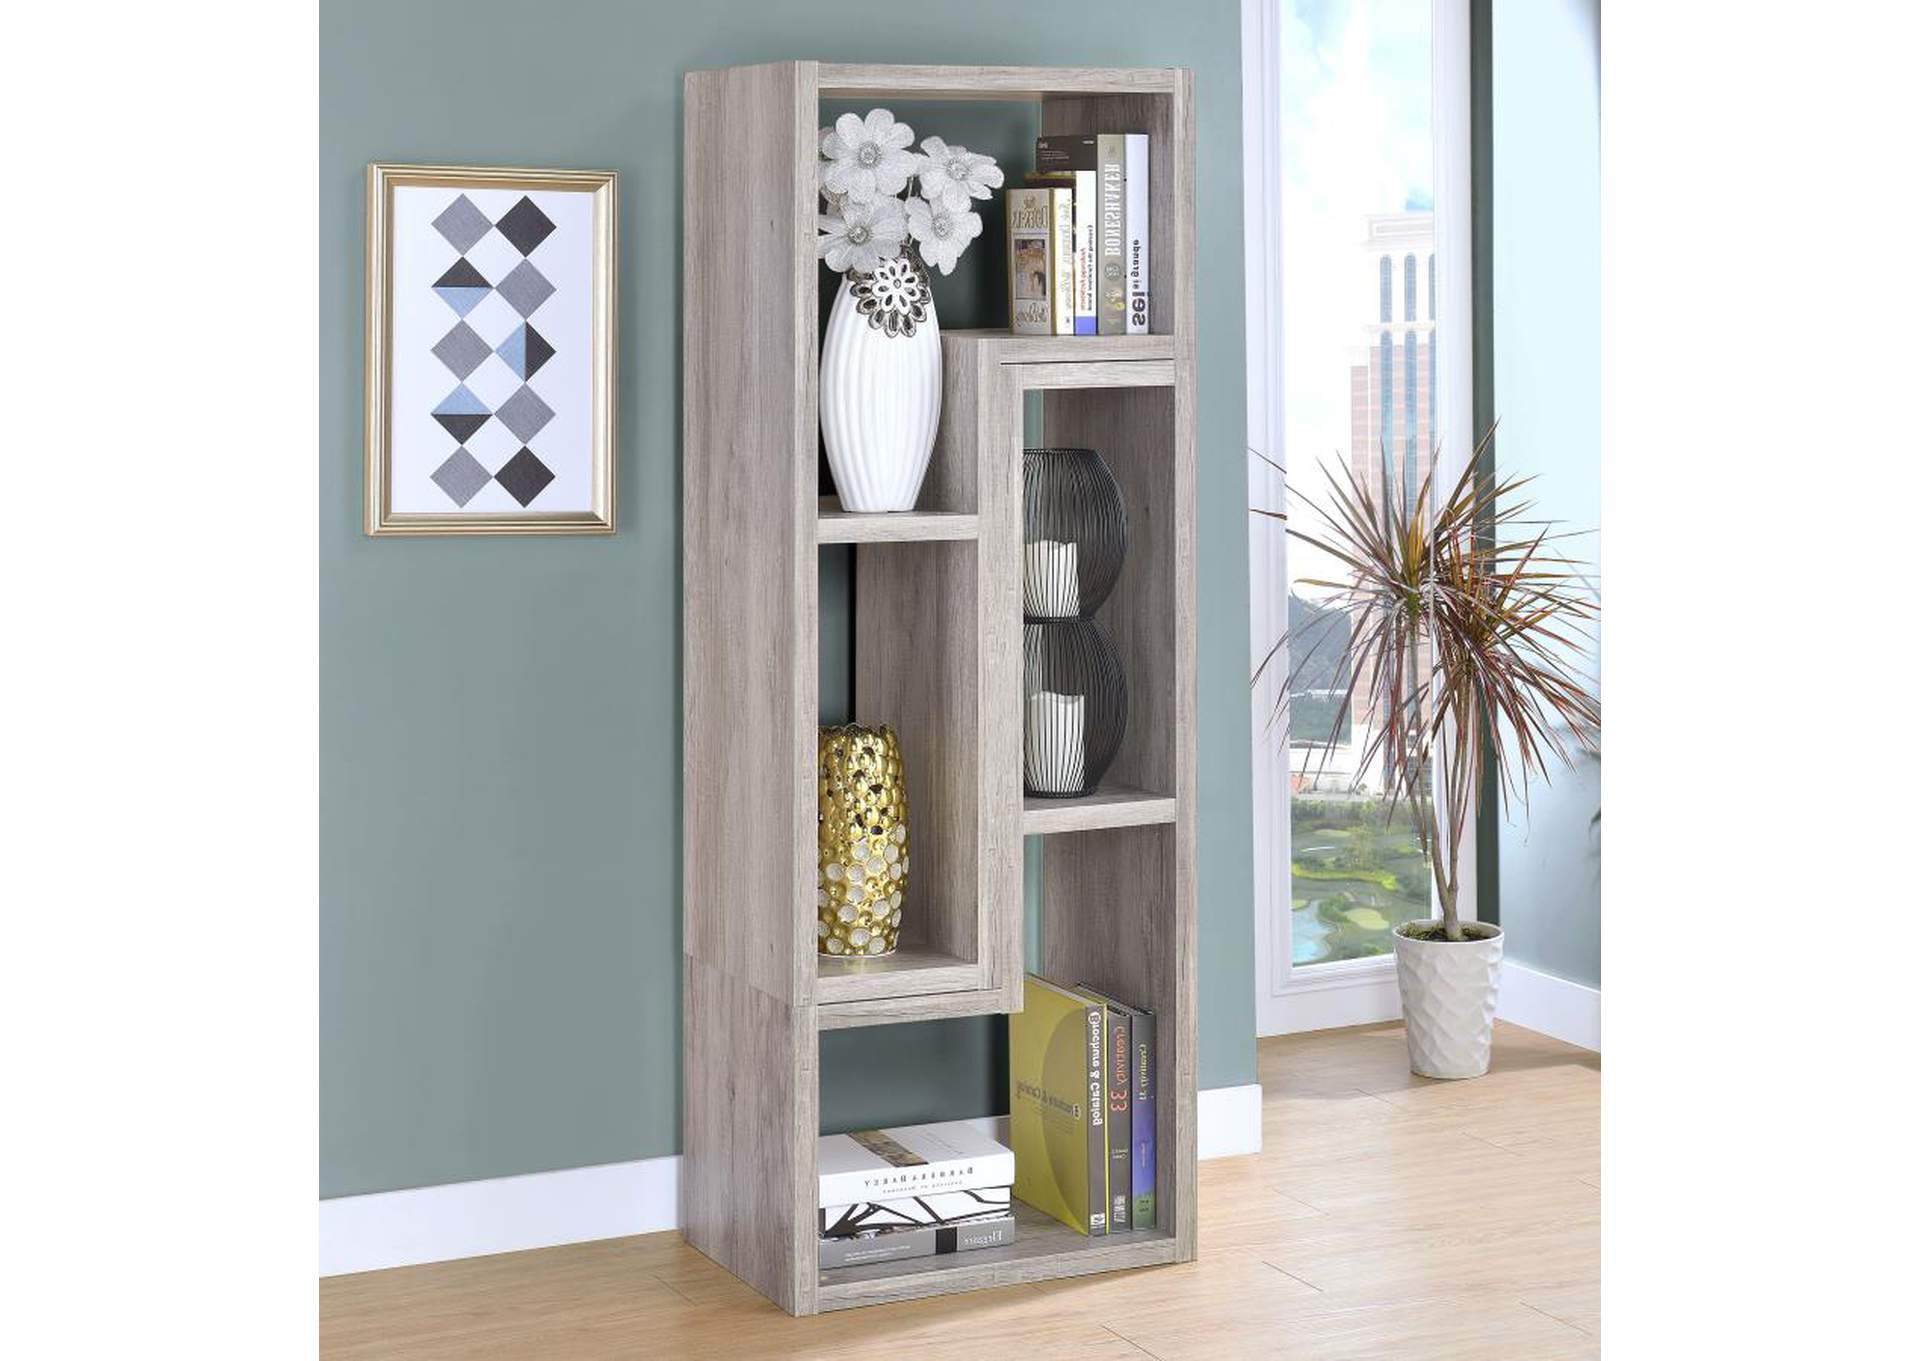 Velma Convertable Bookcase And Tv Console Grey Driftwood,Coaster Furniture